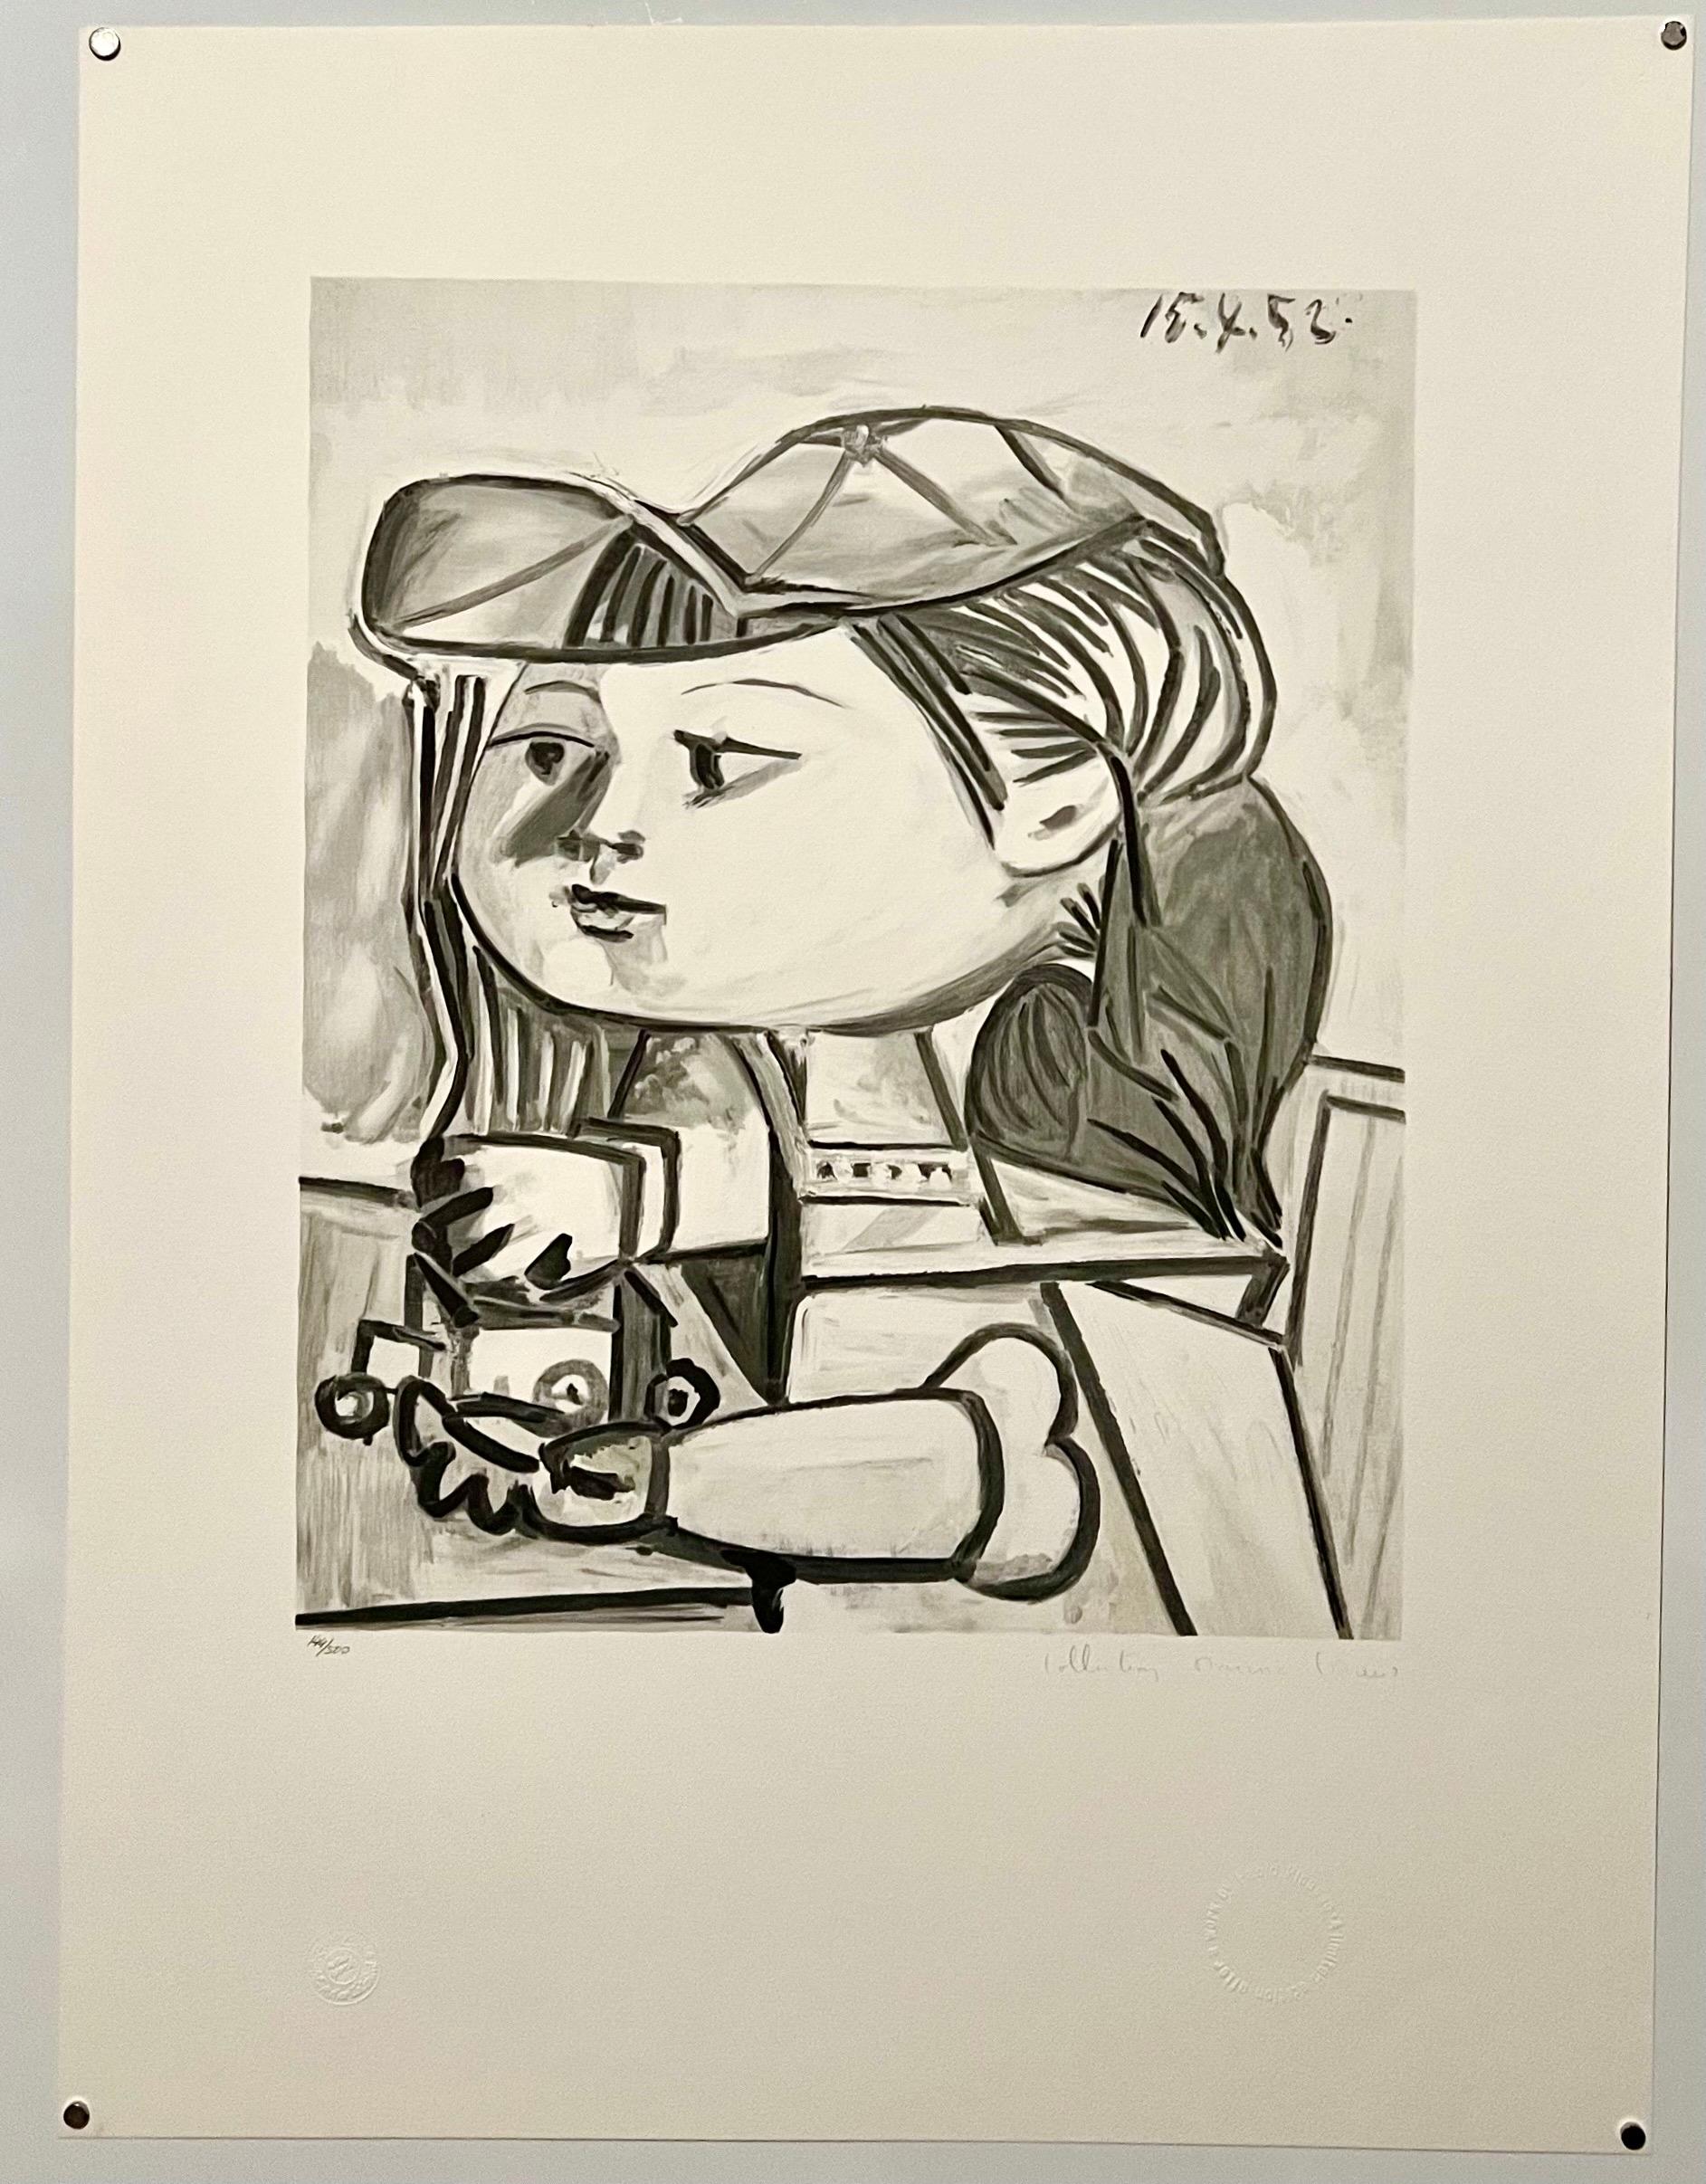 Pablo Picasso Estate Hand Signed Cubist Lithograph Abstract Girl Portrait Tete - Print by (after) Pablo Picasso